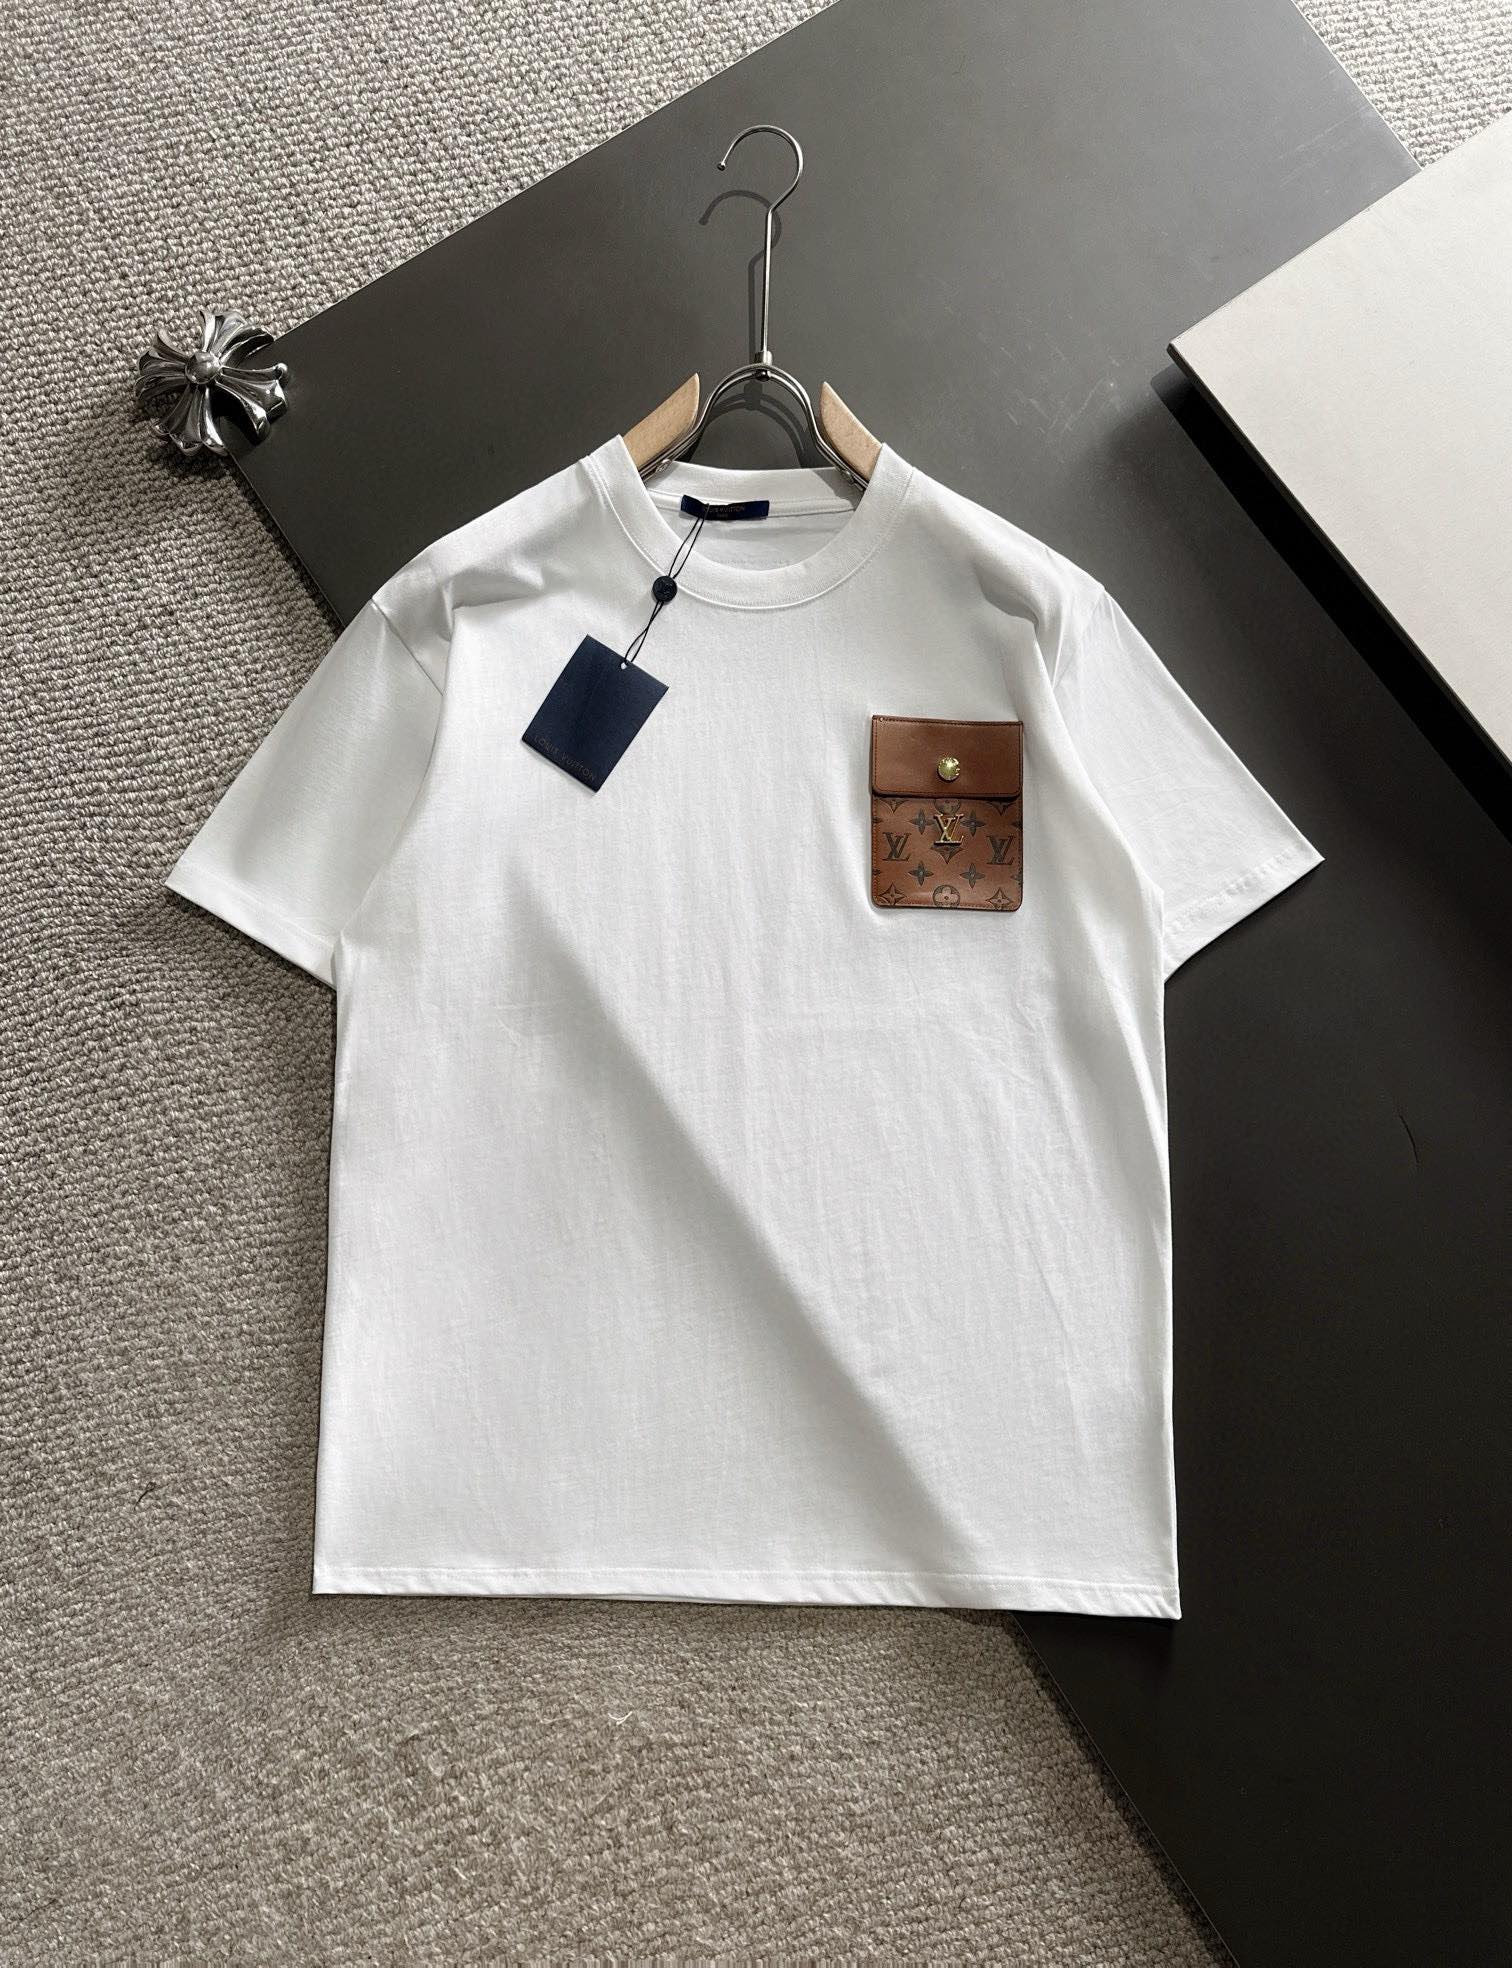 Louis Vuitton Clothing T-Shirt Supplier in China
 Black White Unisex Spring Collection Short Sleeve